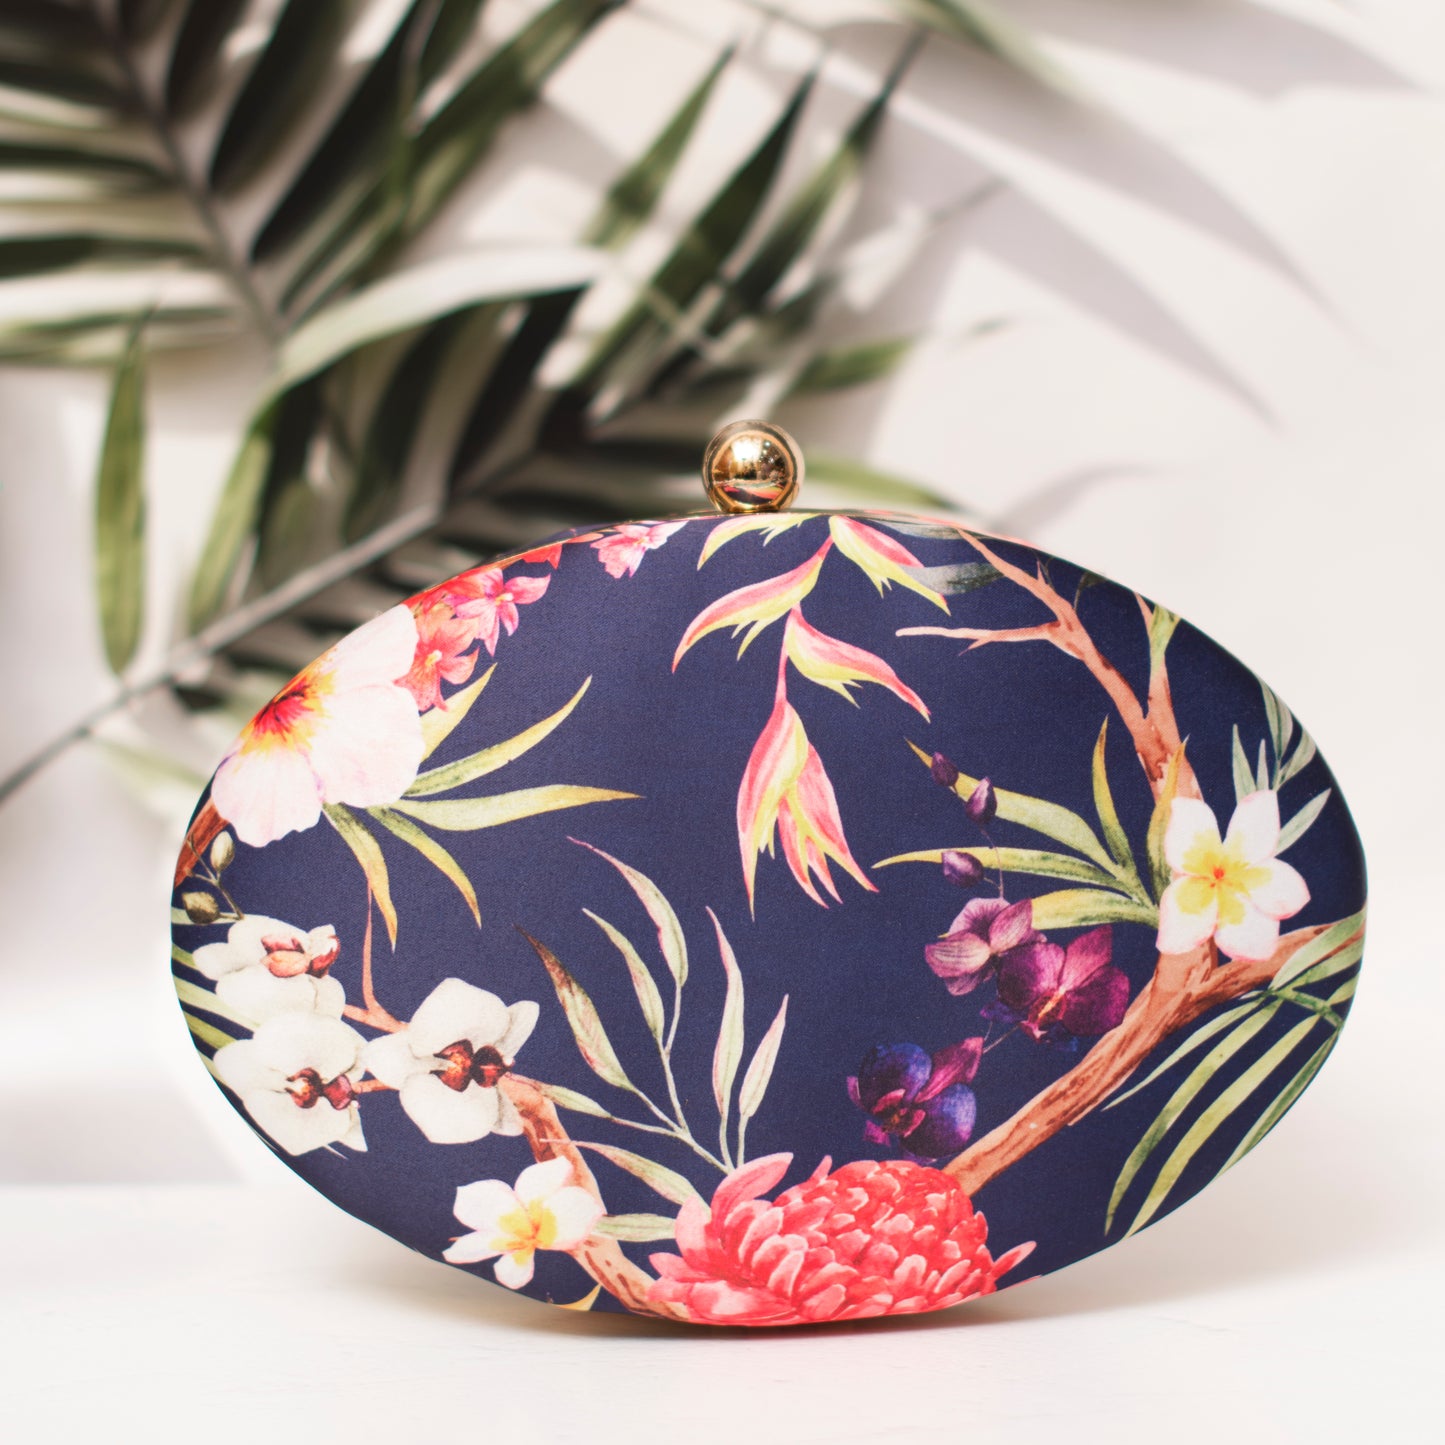 The Floral Touch Clutch